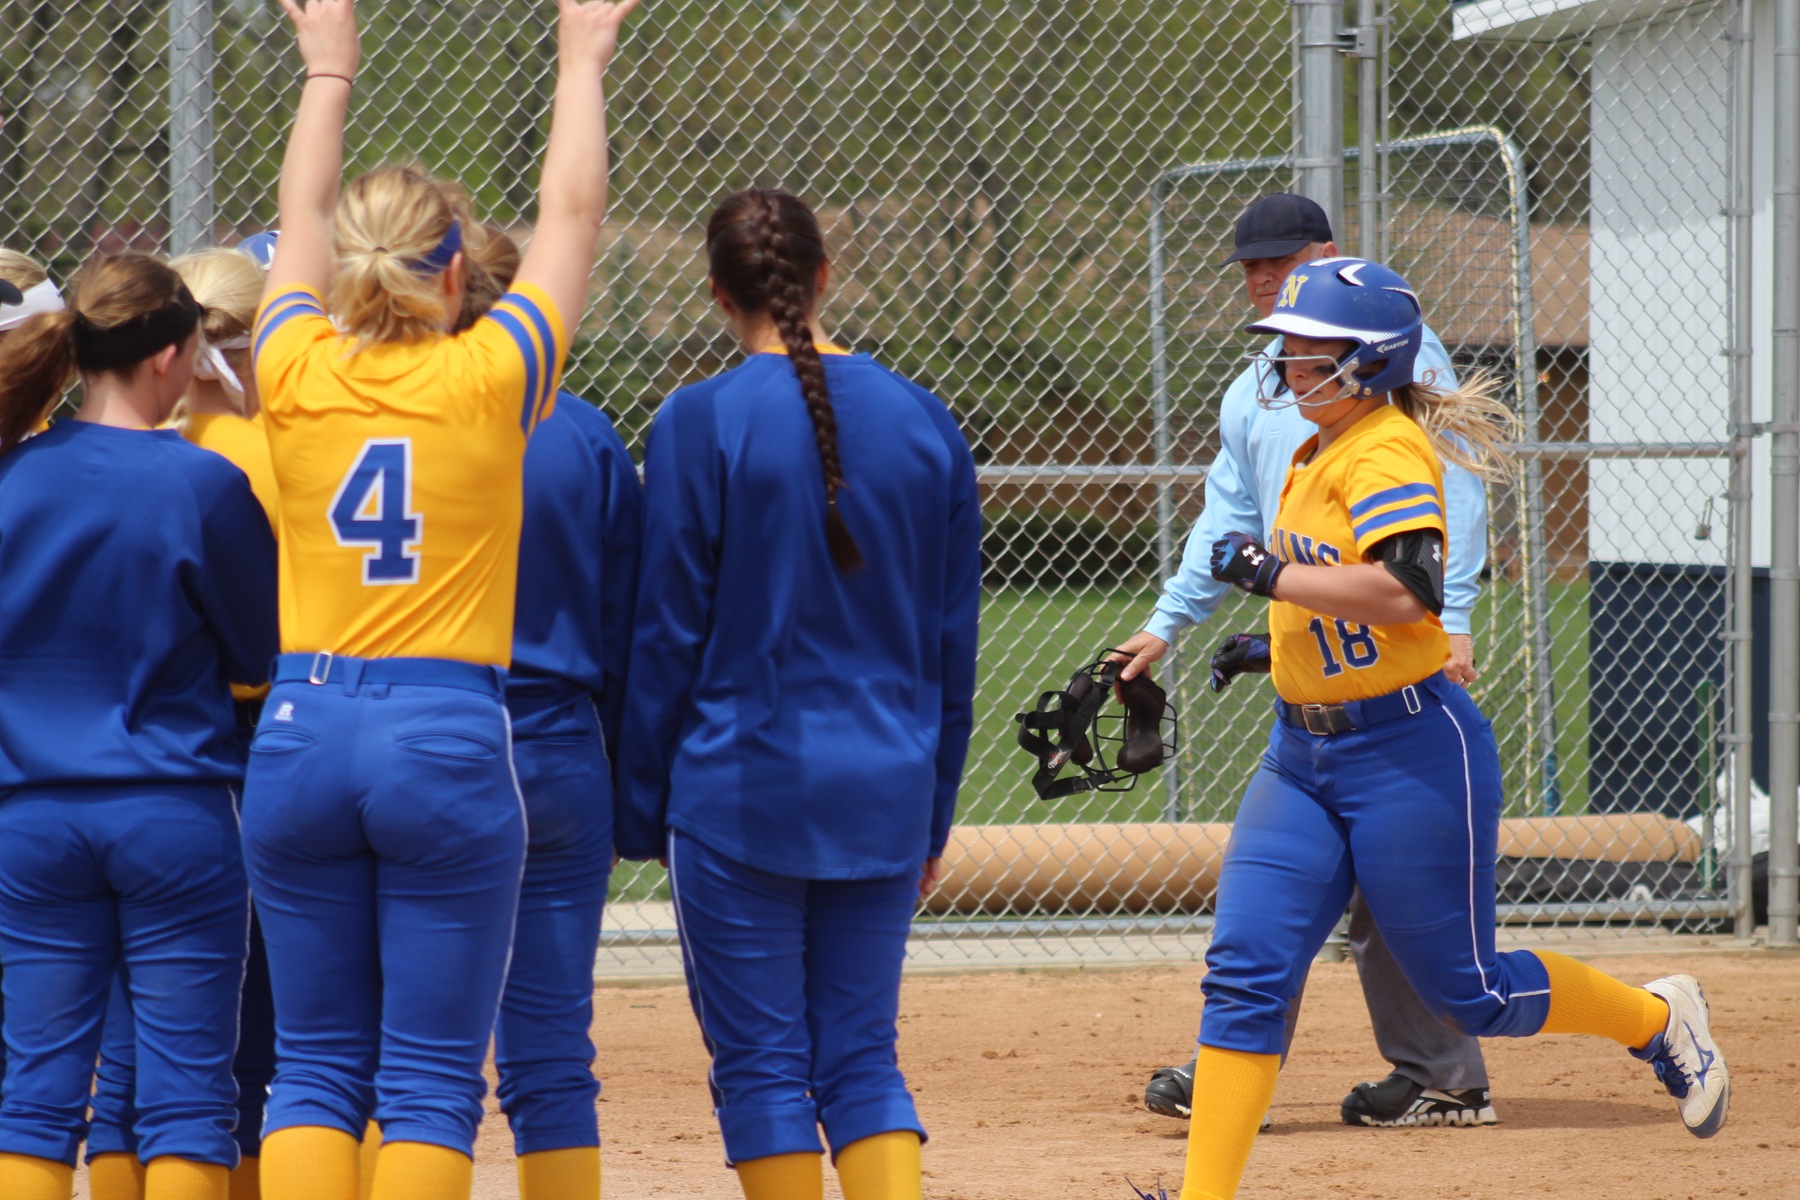 NIACC players celebrate as Shelby Low approaches home plate after hitting a solo home run in the third inning.